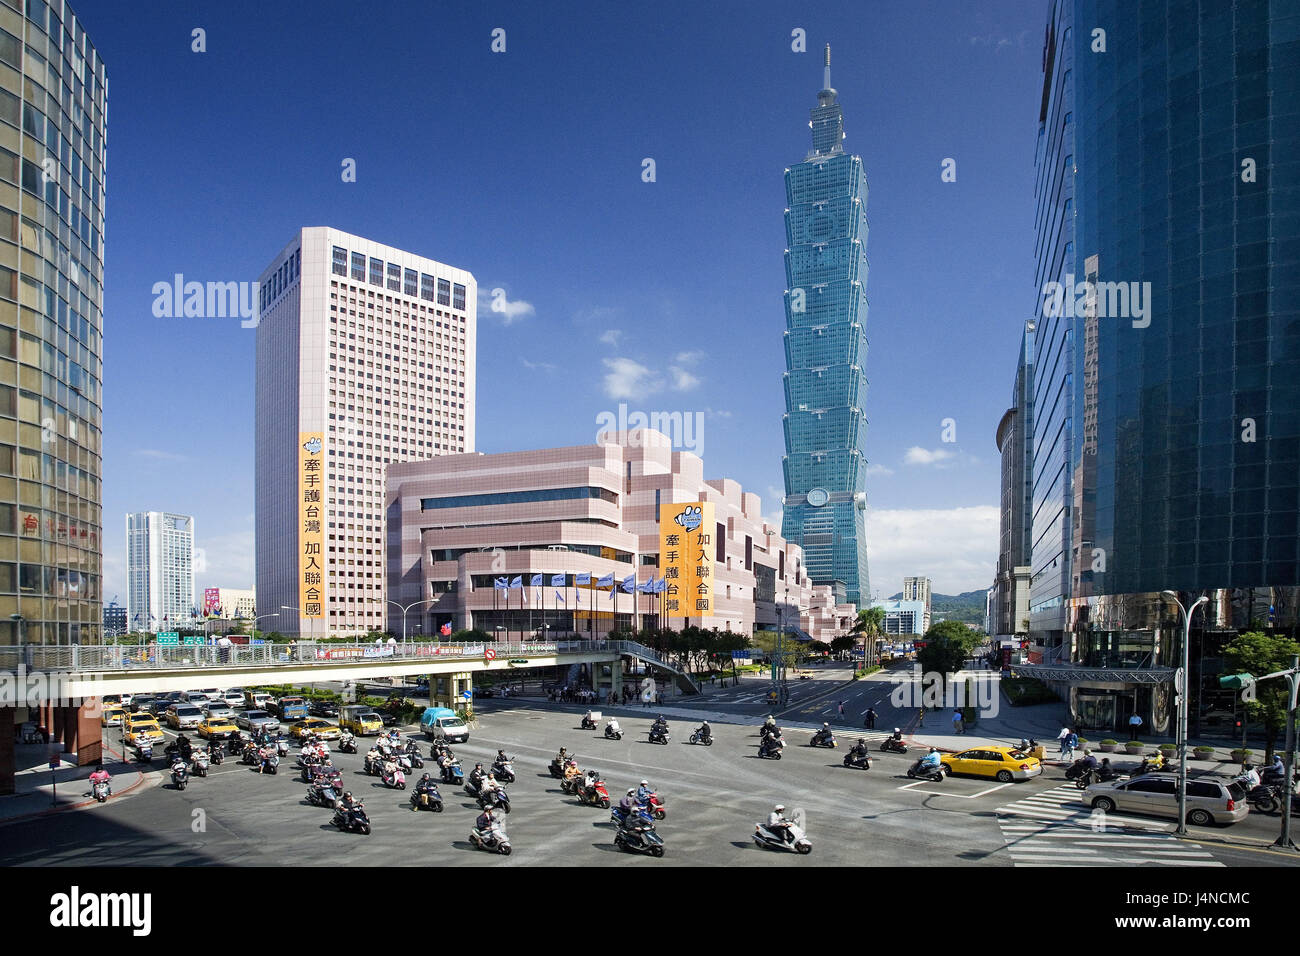 Taiwan, Taipeh, town view, Taipei Financial centre, street, traffic, no property release, Asia, Eastern Asia, town, capital, city, metropolis, building, skyscraper, high rise, architecture, traffic, Stock Photo